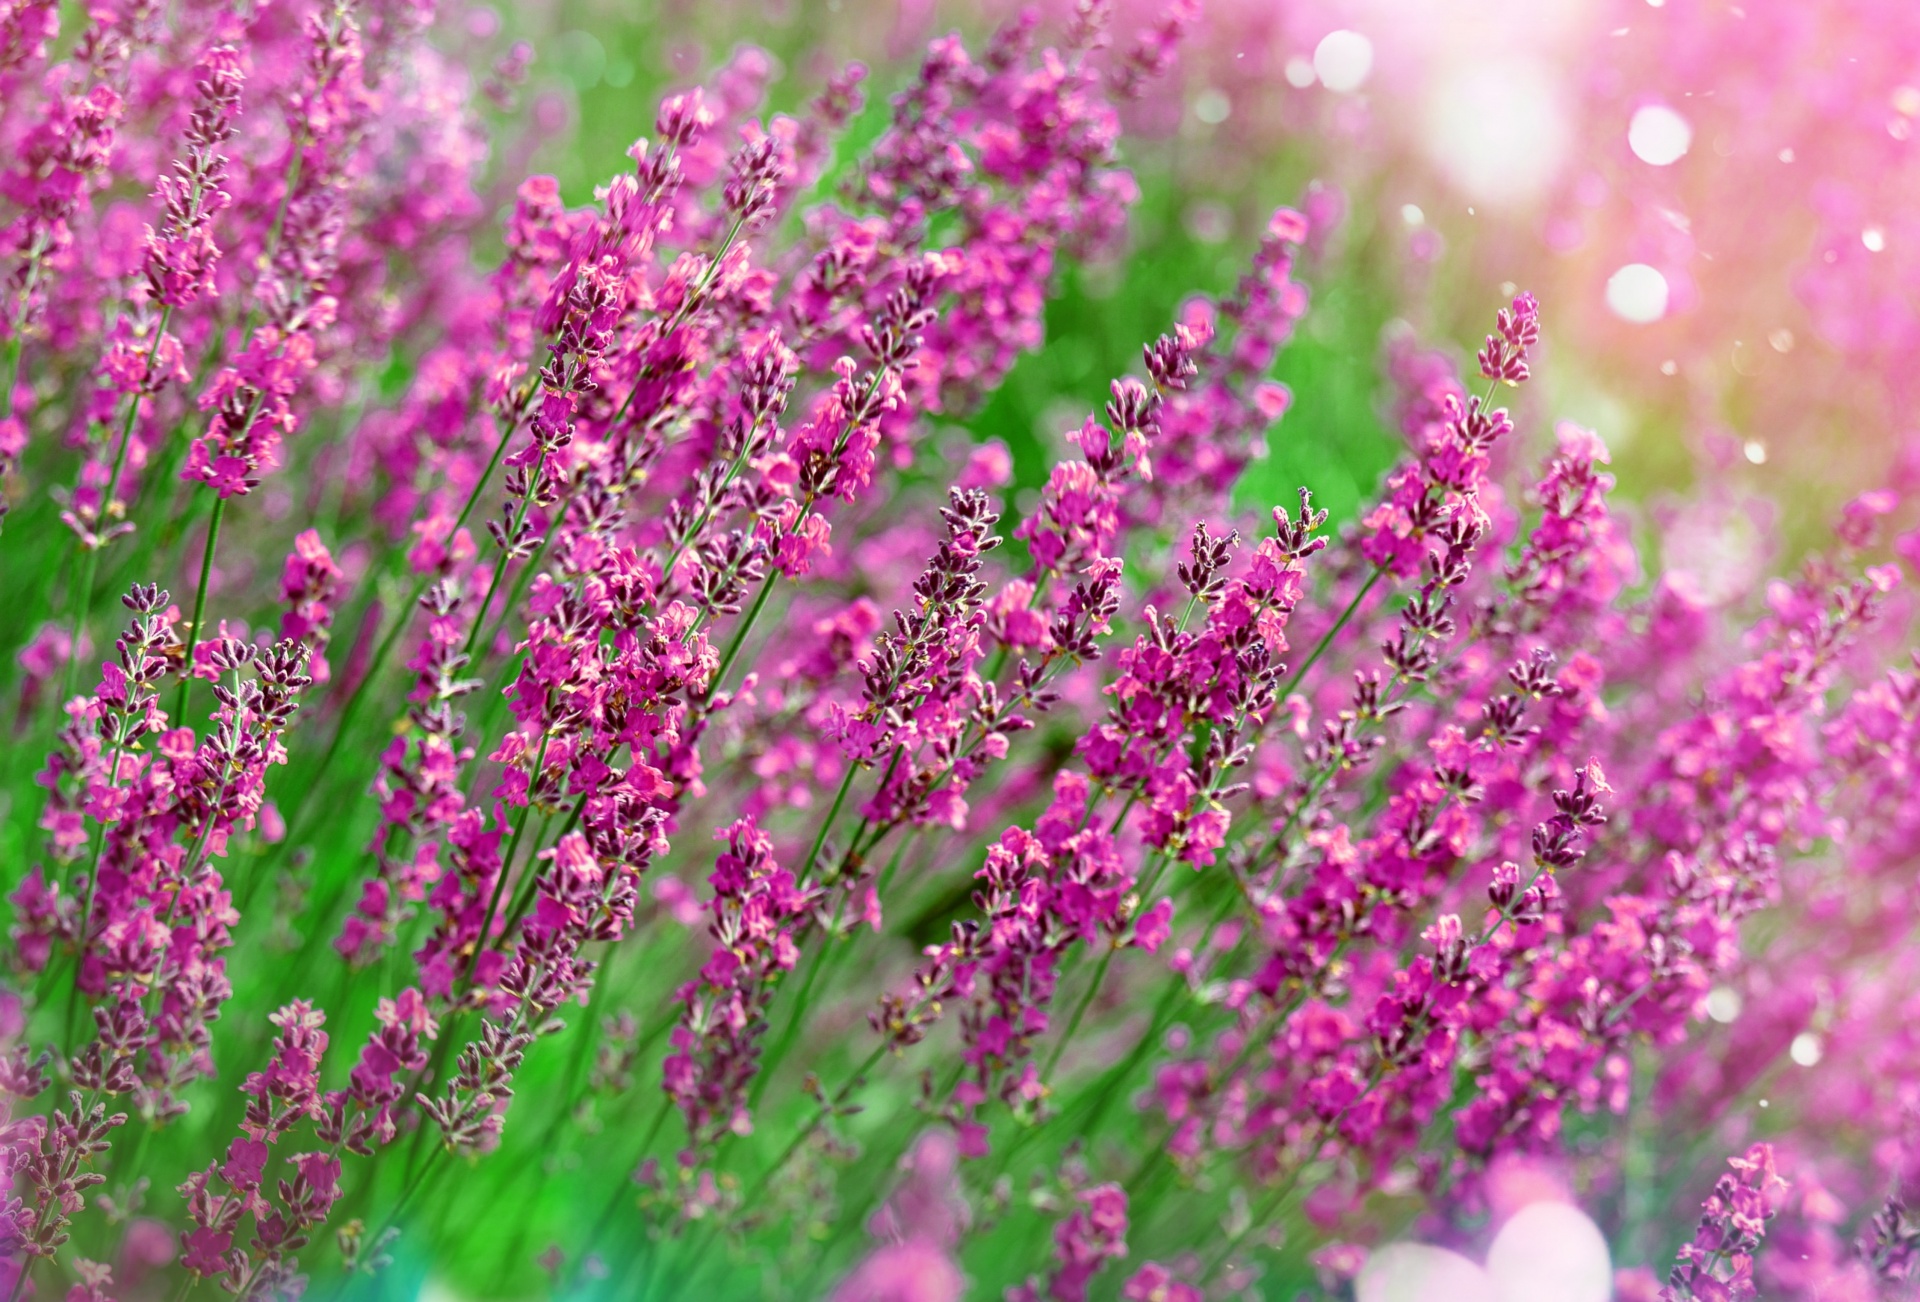 Lavender flowers blossoms wildflowers wild flower meadow photo photography closeup